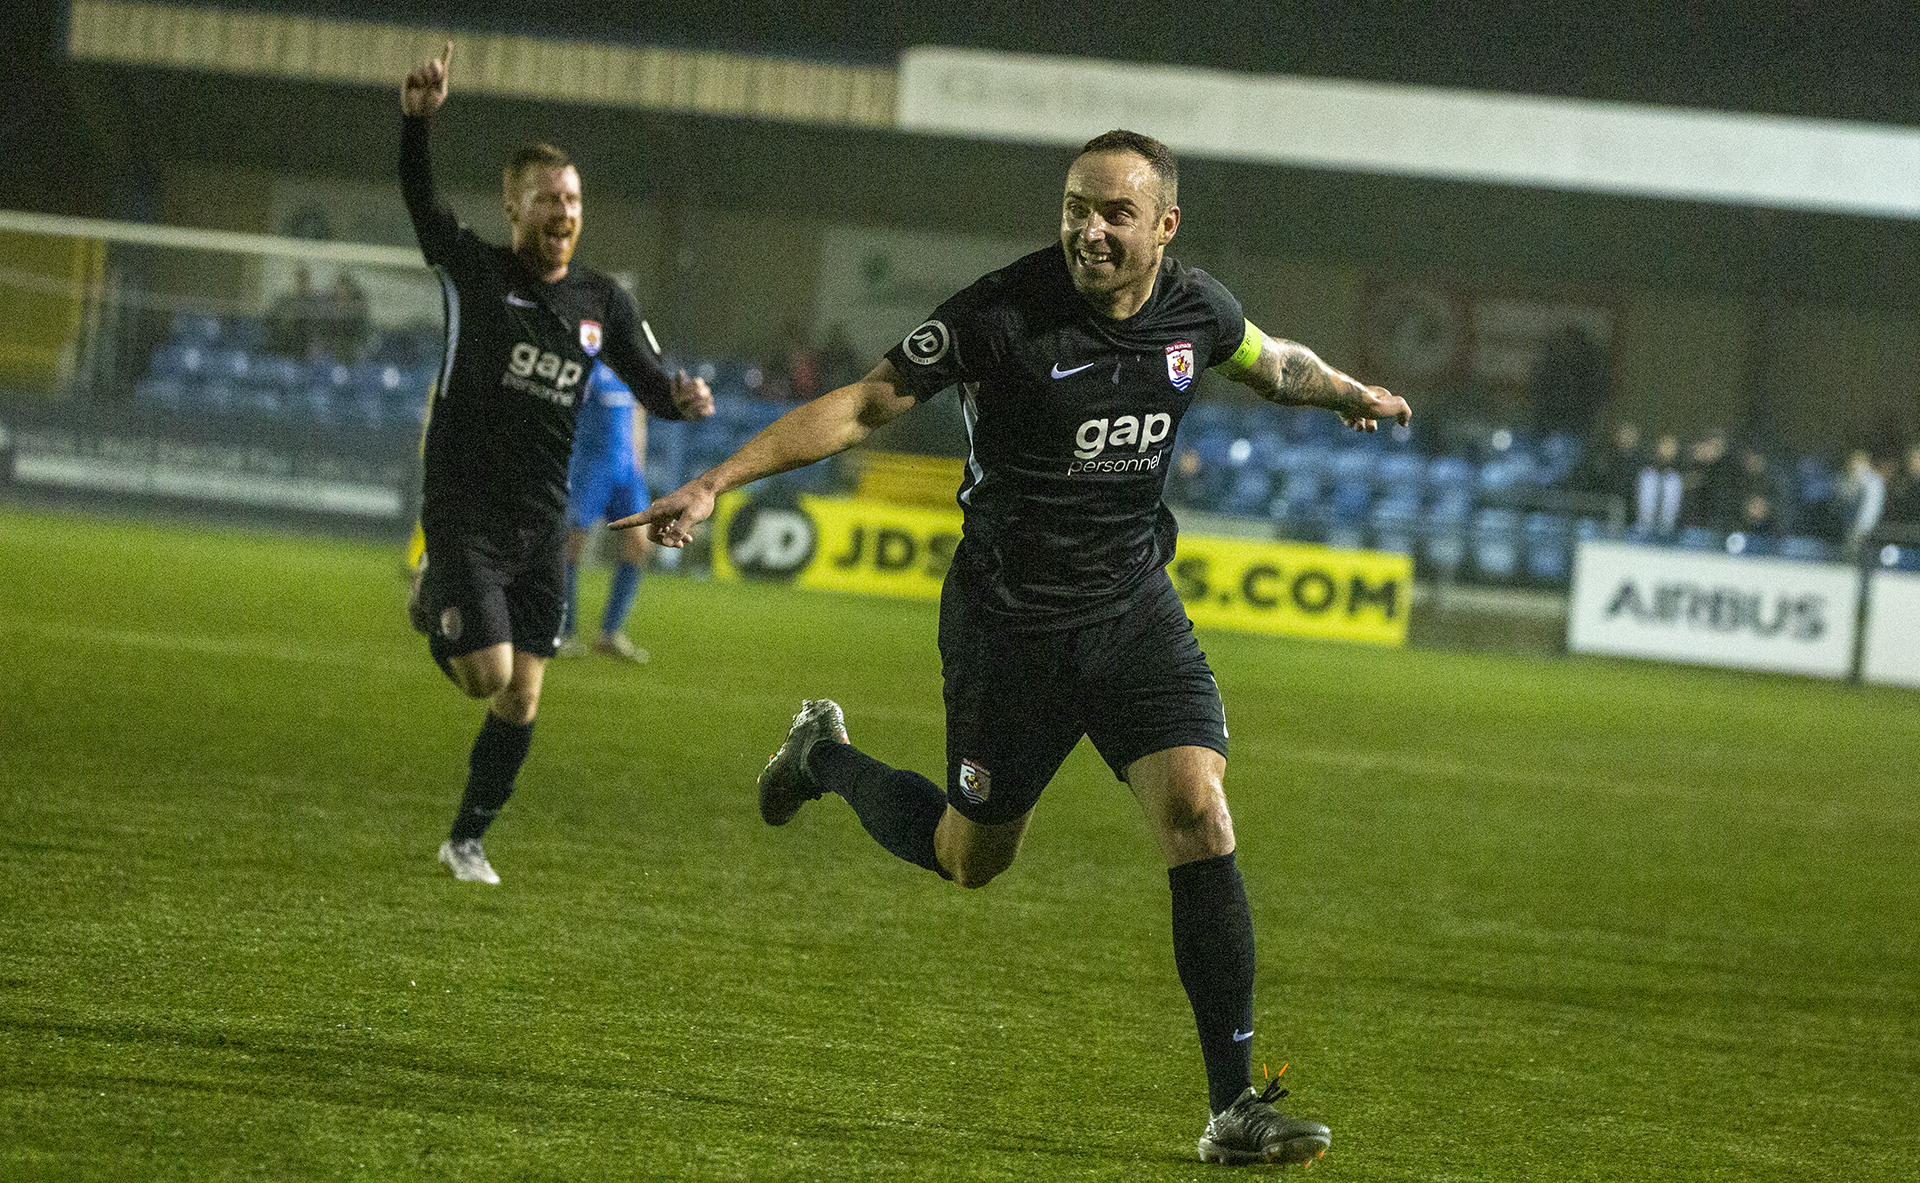 Danny Holmes celebrates his first goal for The Nomads | © NCM Media